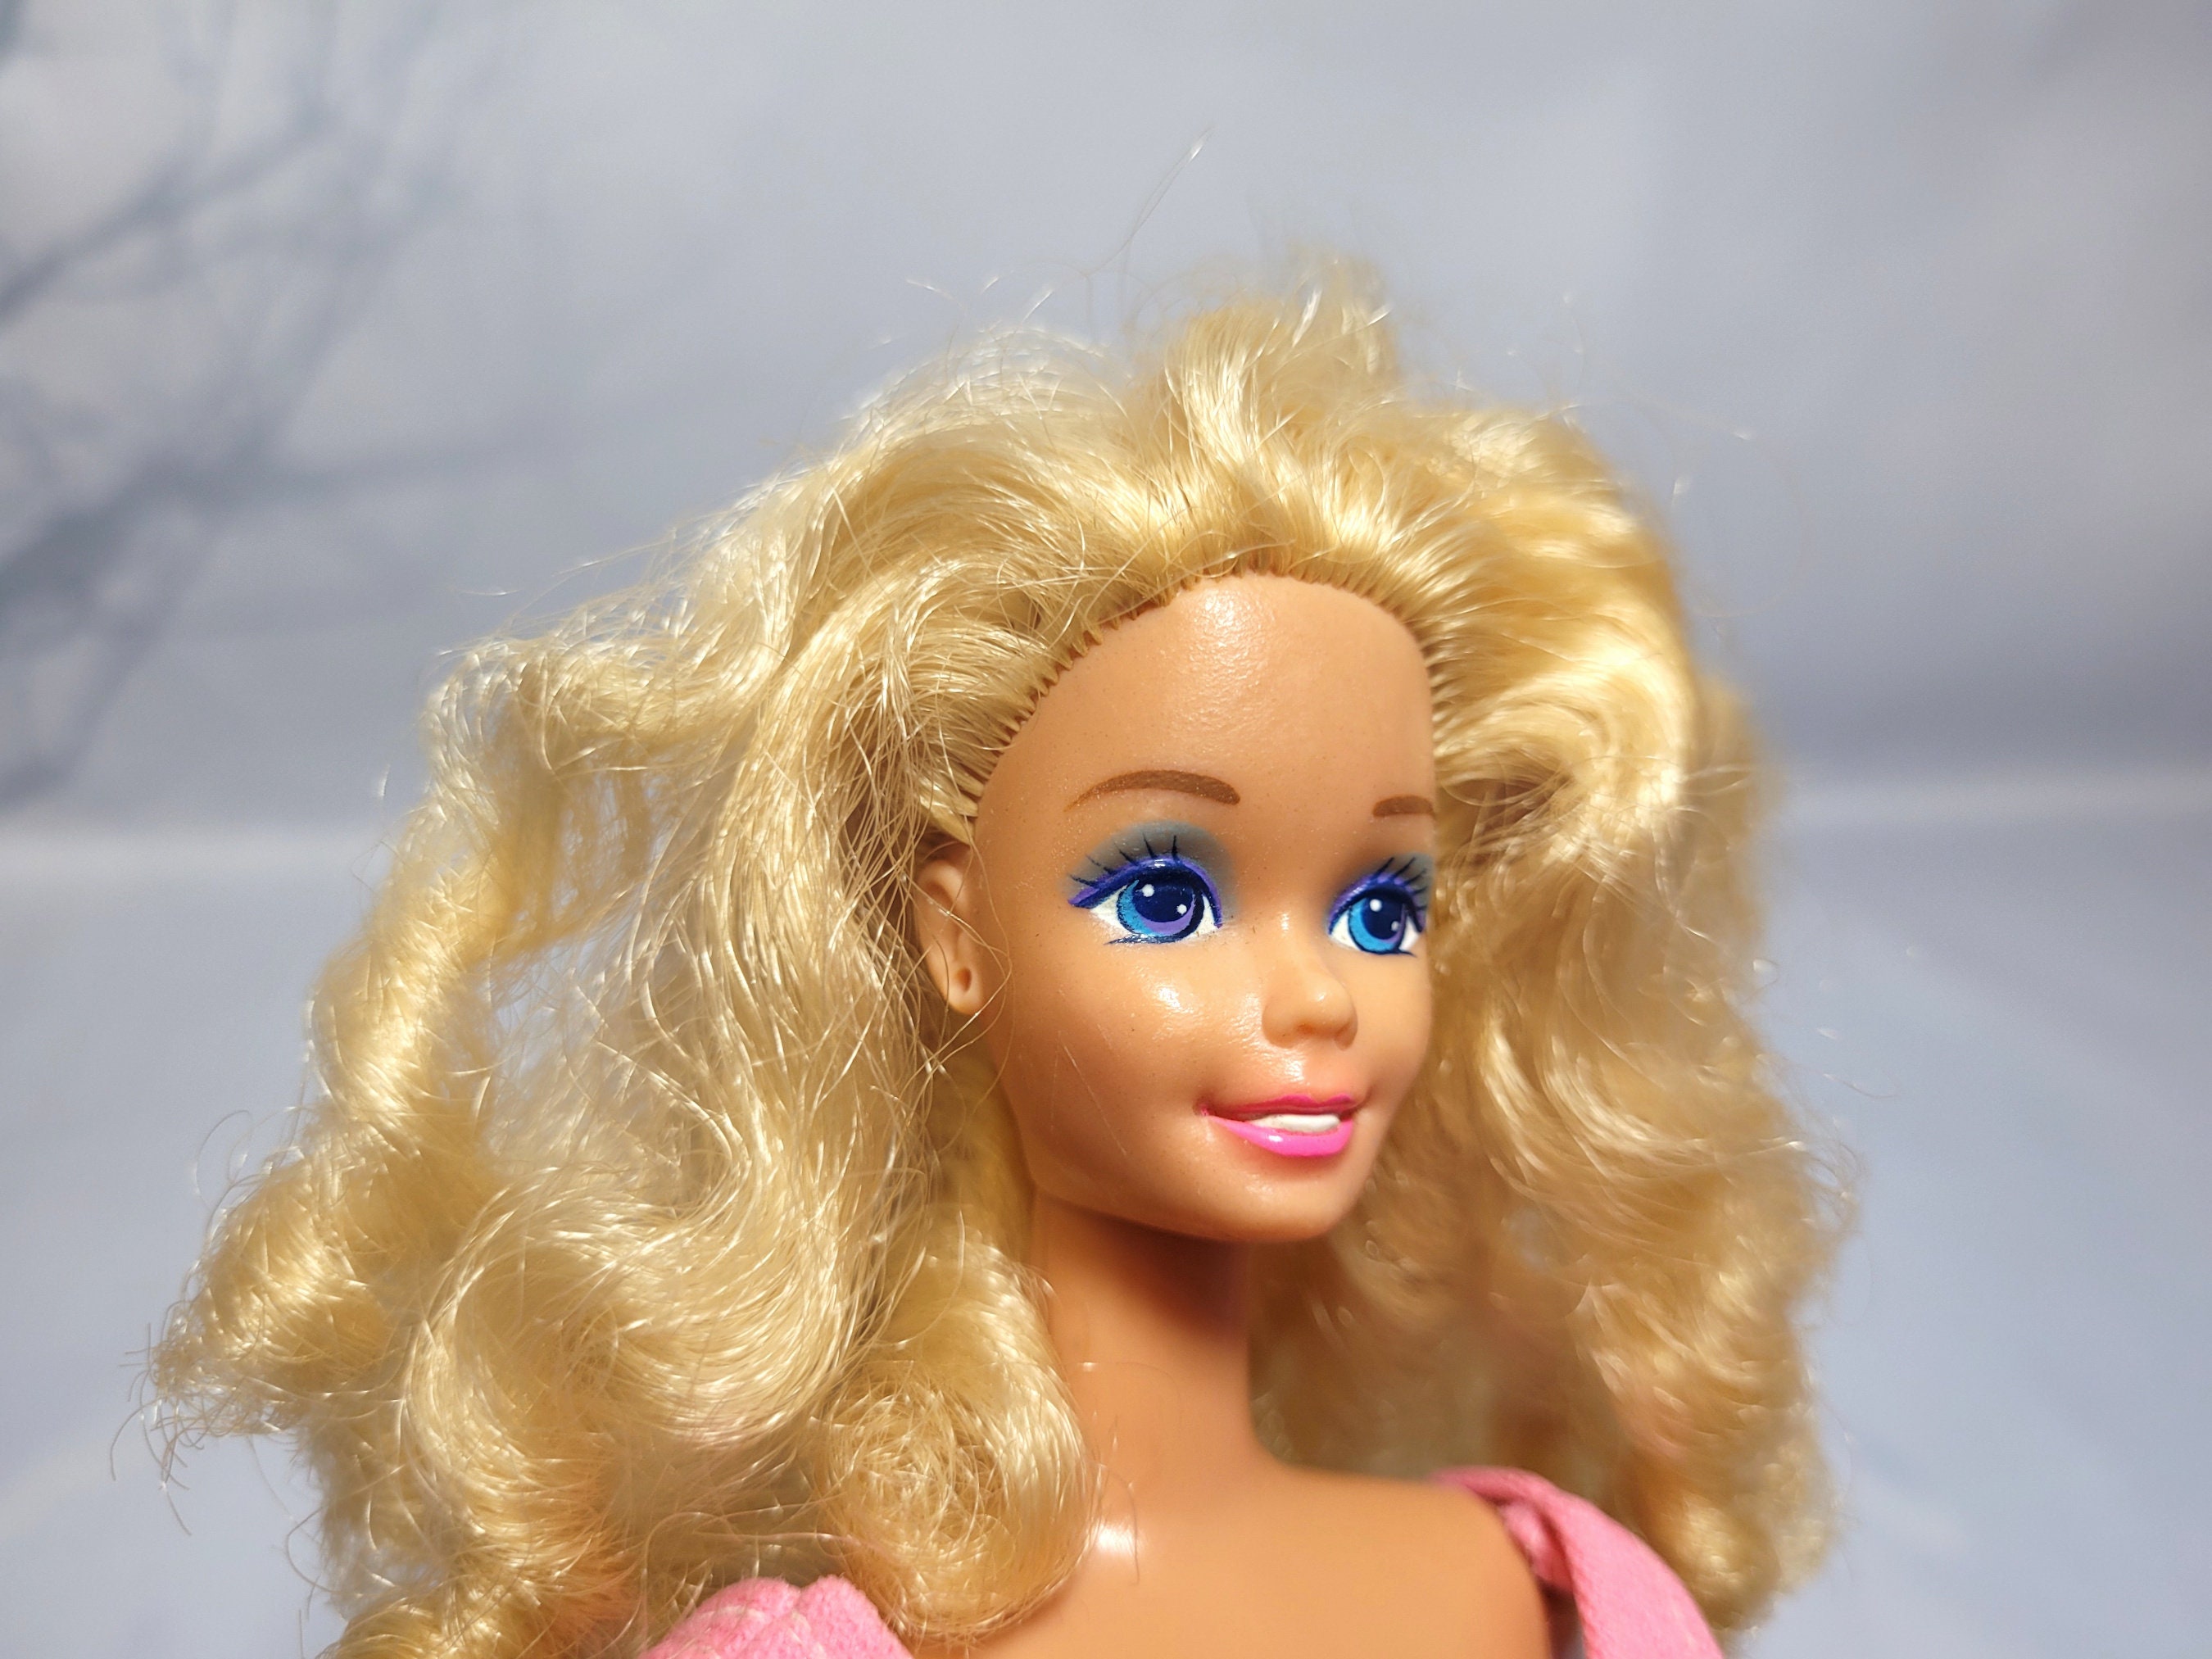 Barbie James N Glambarbie Fashionista Blonde Doll - Educational Toy For  Girls, Movie-themed Gift